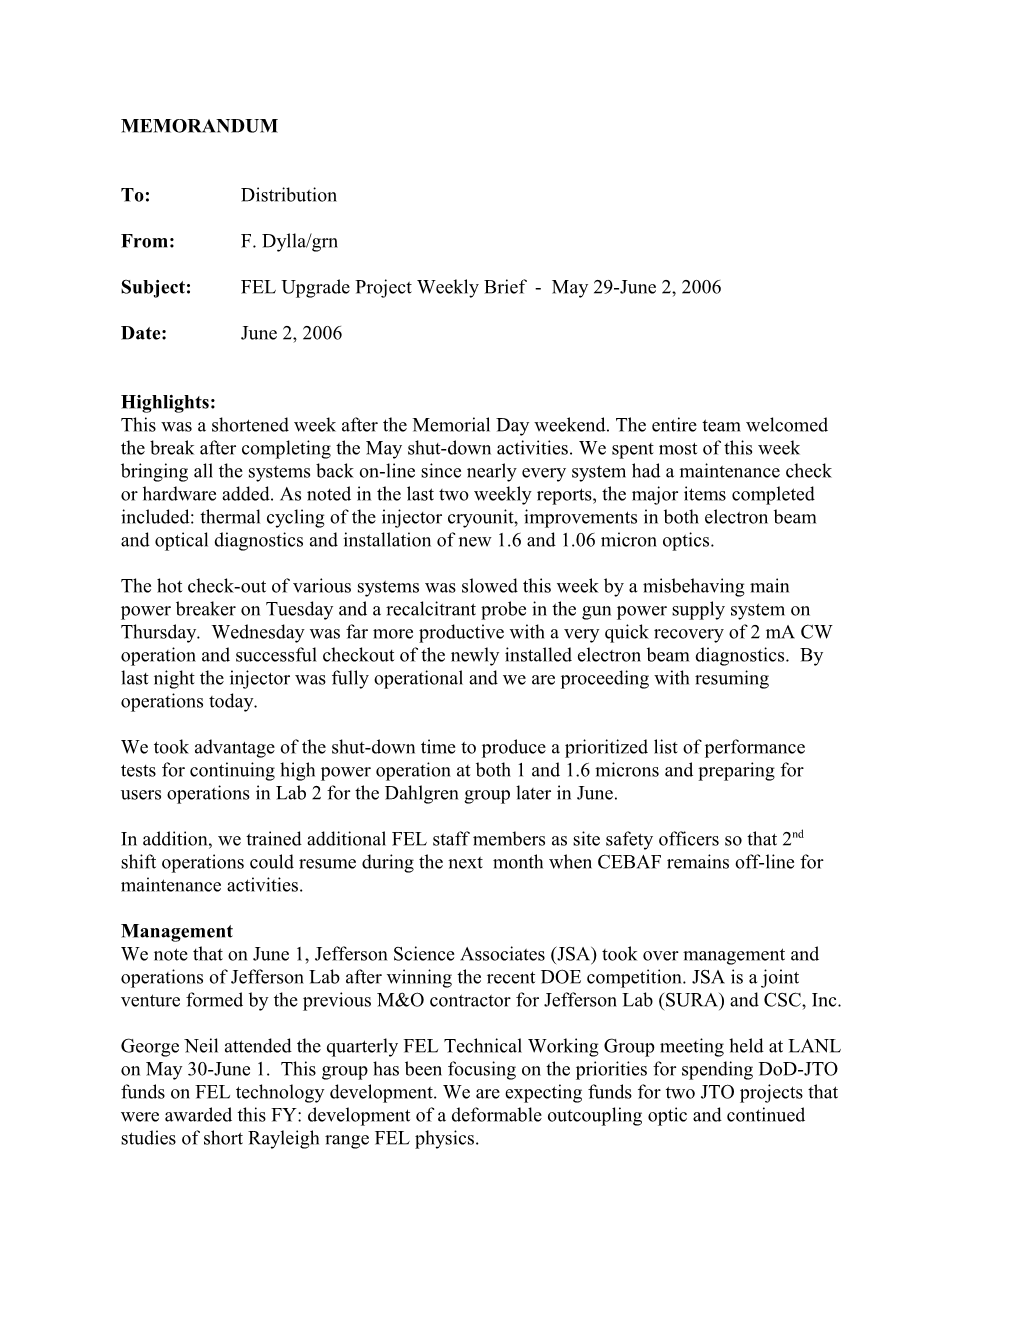 Subject:FEL Upgrade Project Weekly Brief - May 29-June 2, 2006